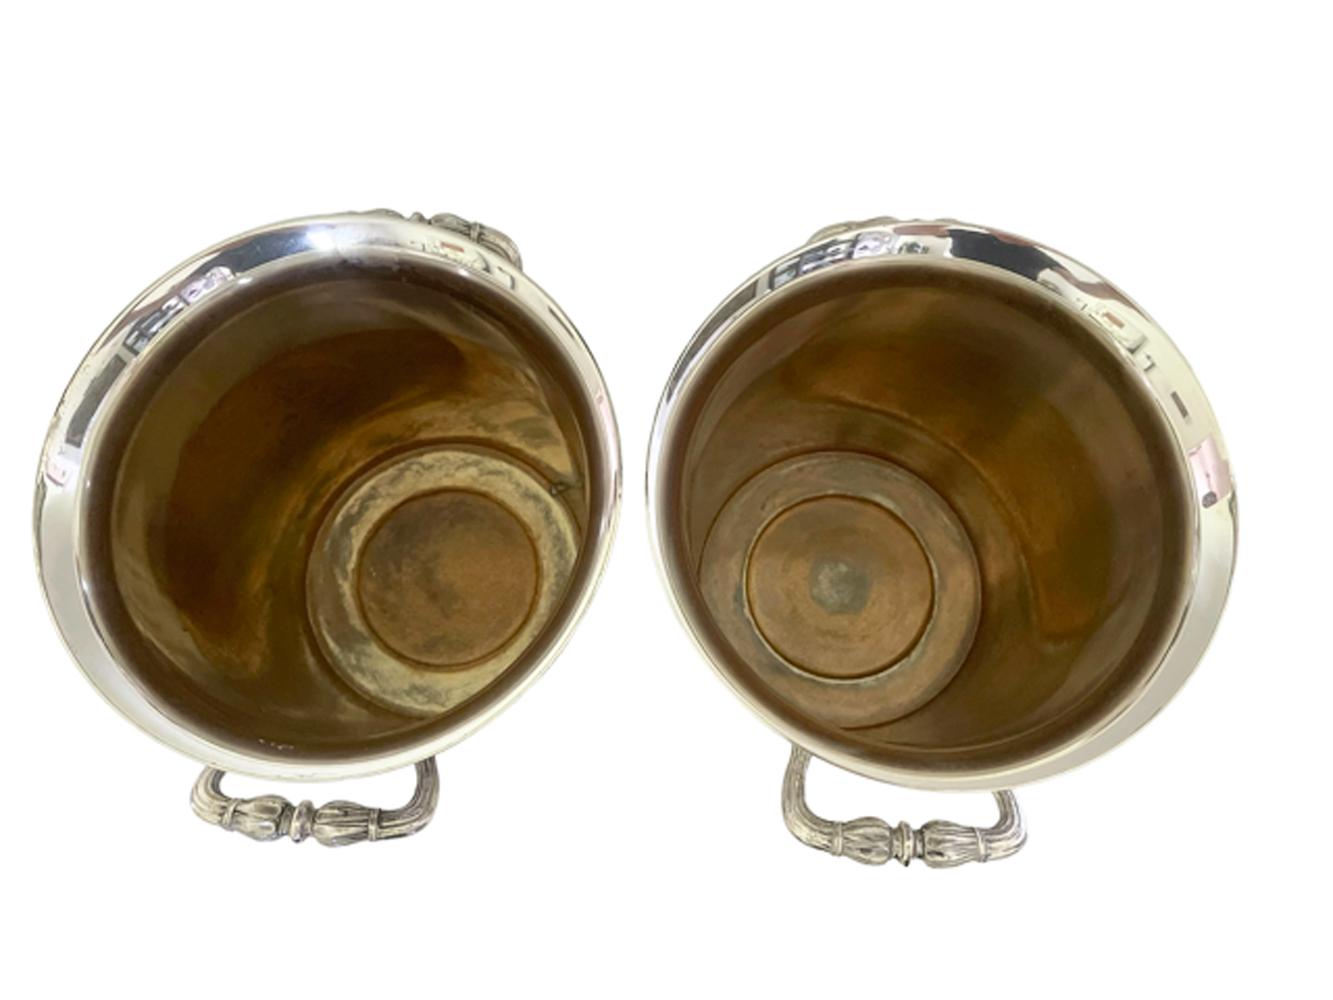 Pair of French Art Deco Silver Plate Champagne Buckets / Wine Coolers In Good Condition For Sale In Nantucket, MA